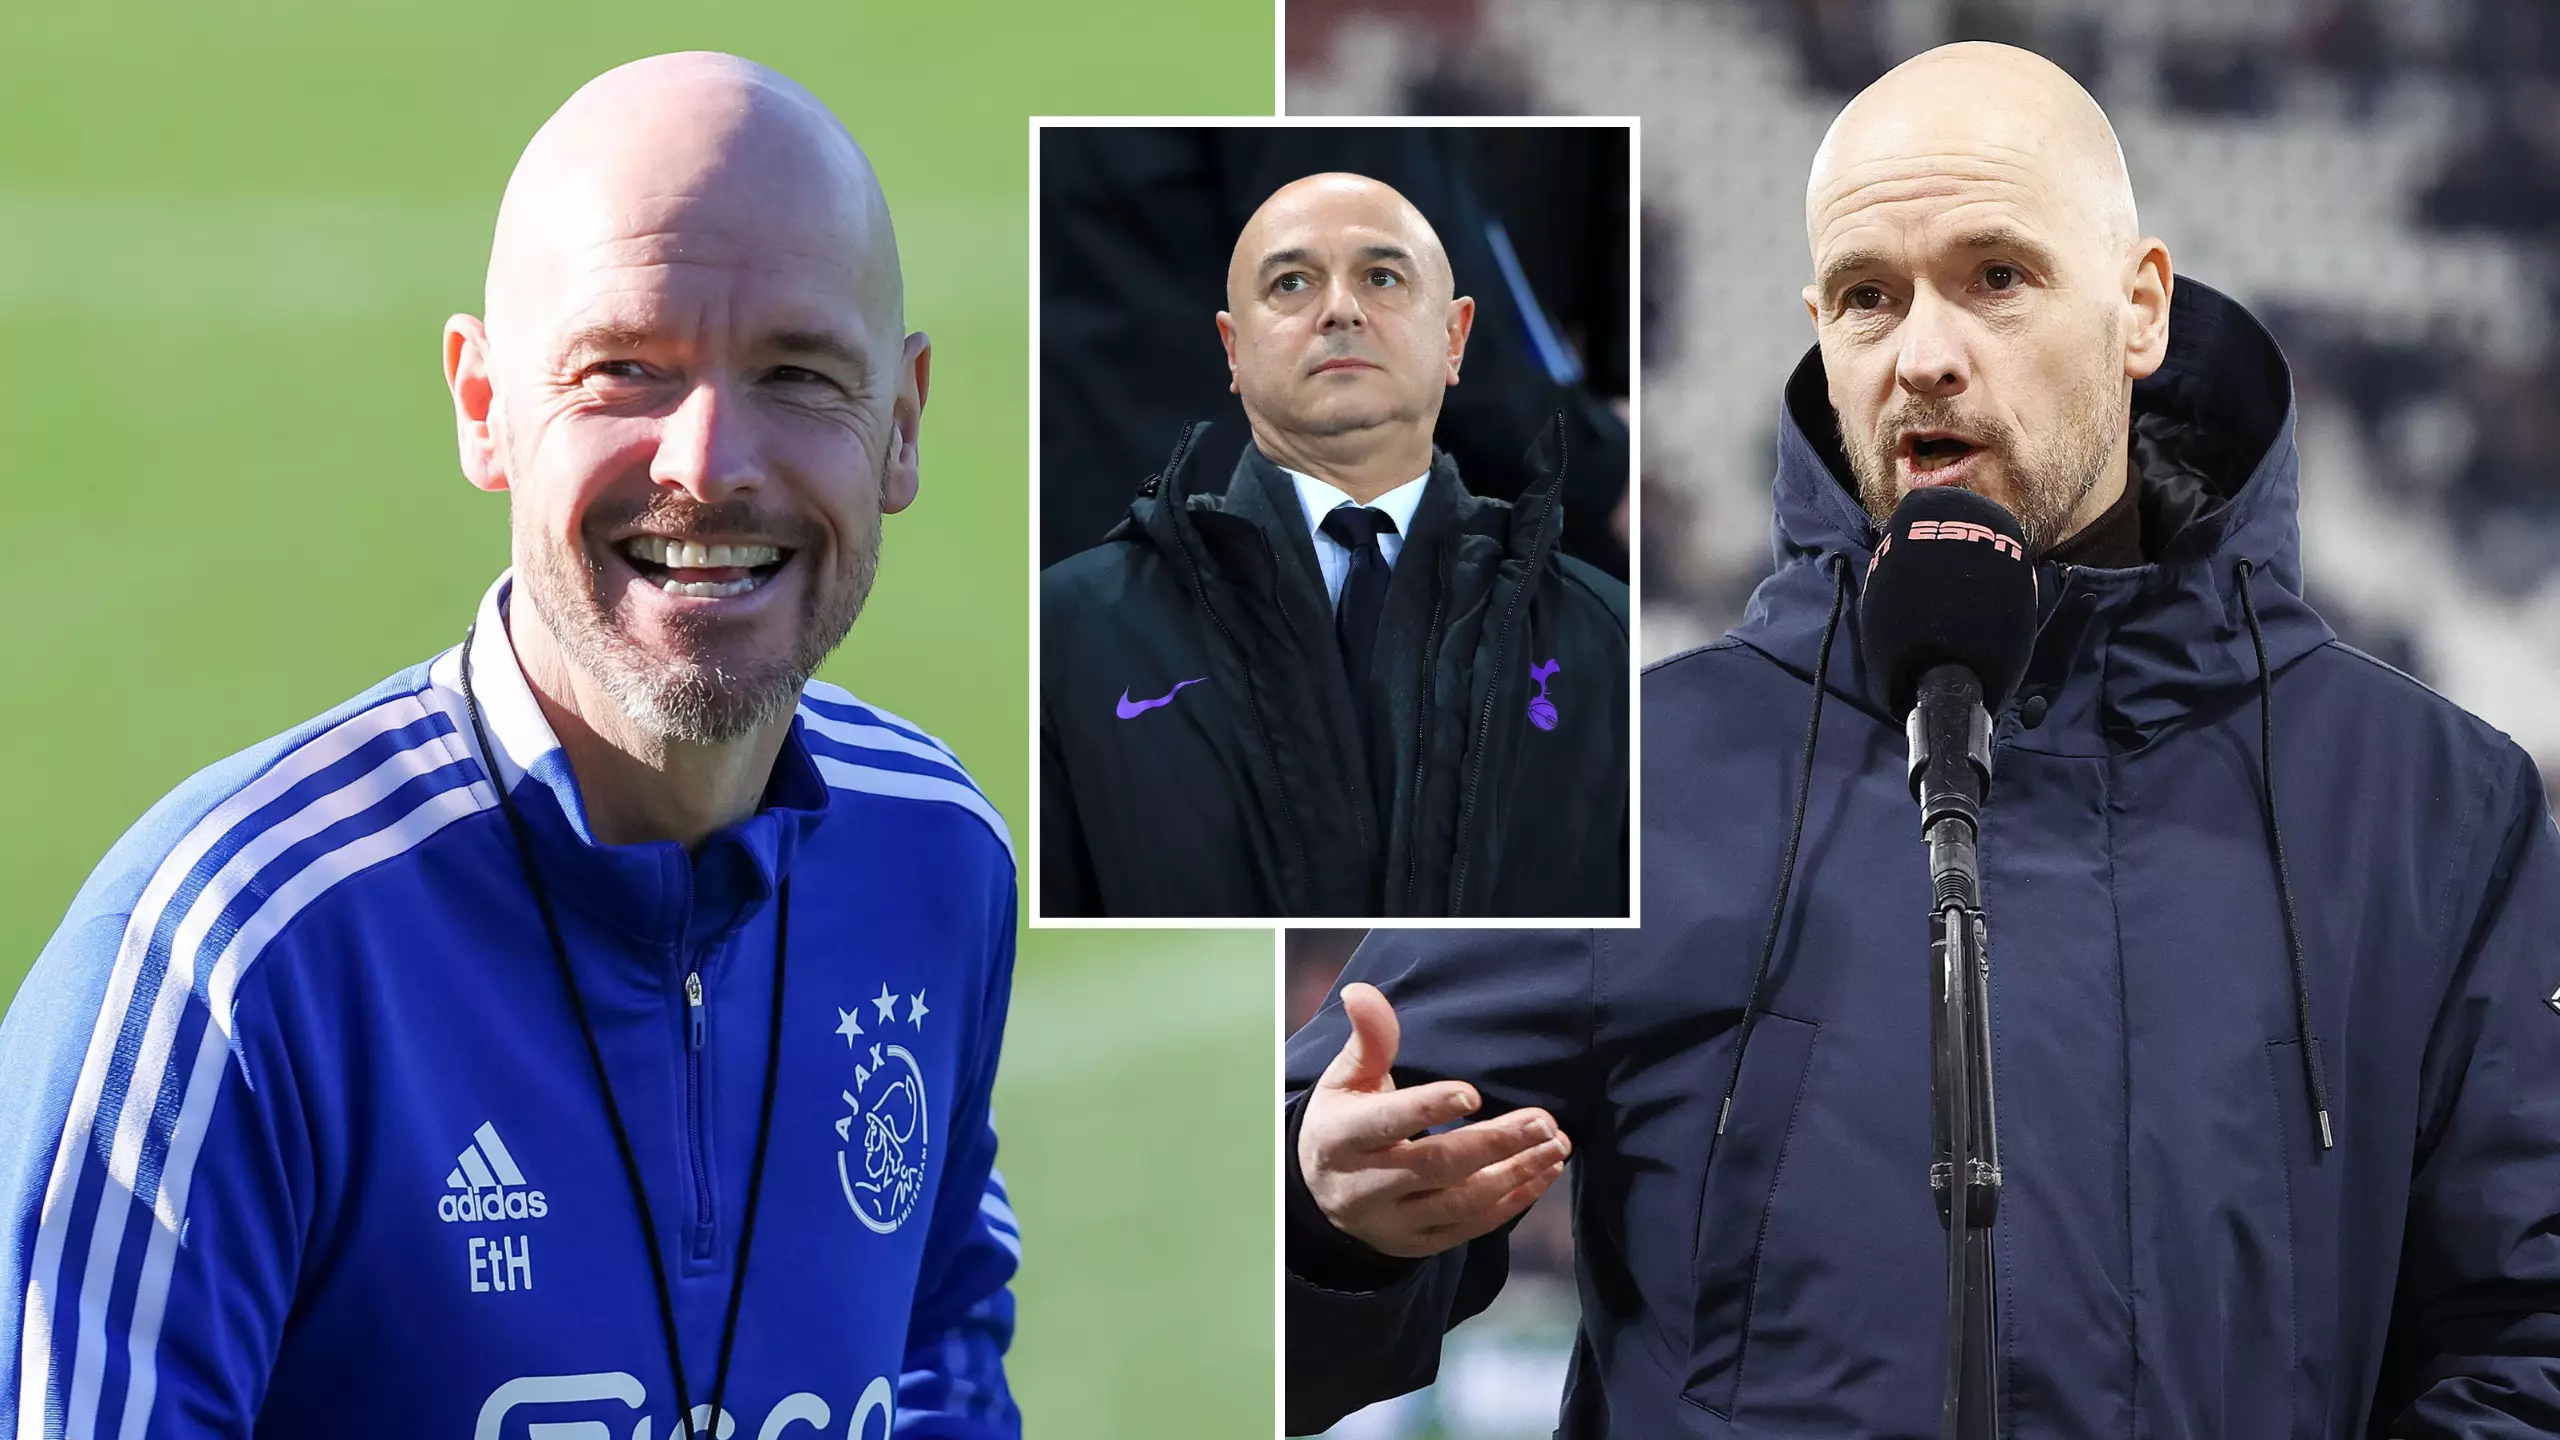 Erik Ten Hag 'Blew His Interview' With Tottenham Hotspur After Making 'Odd Demands' With 'Lack Of Charisma'